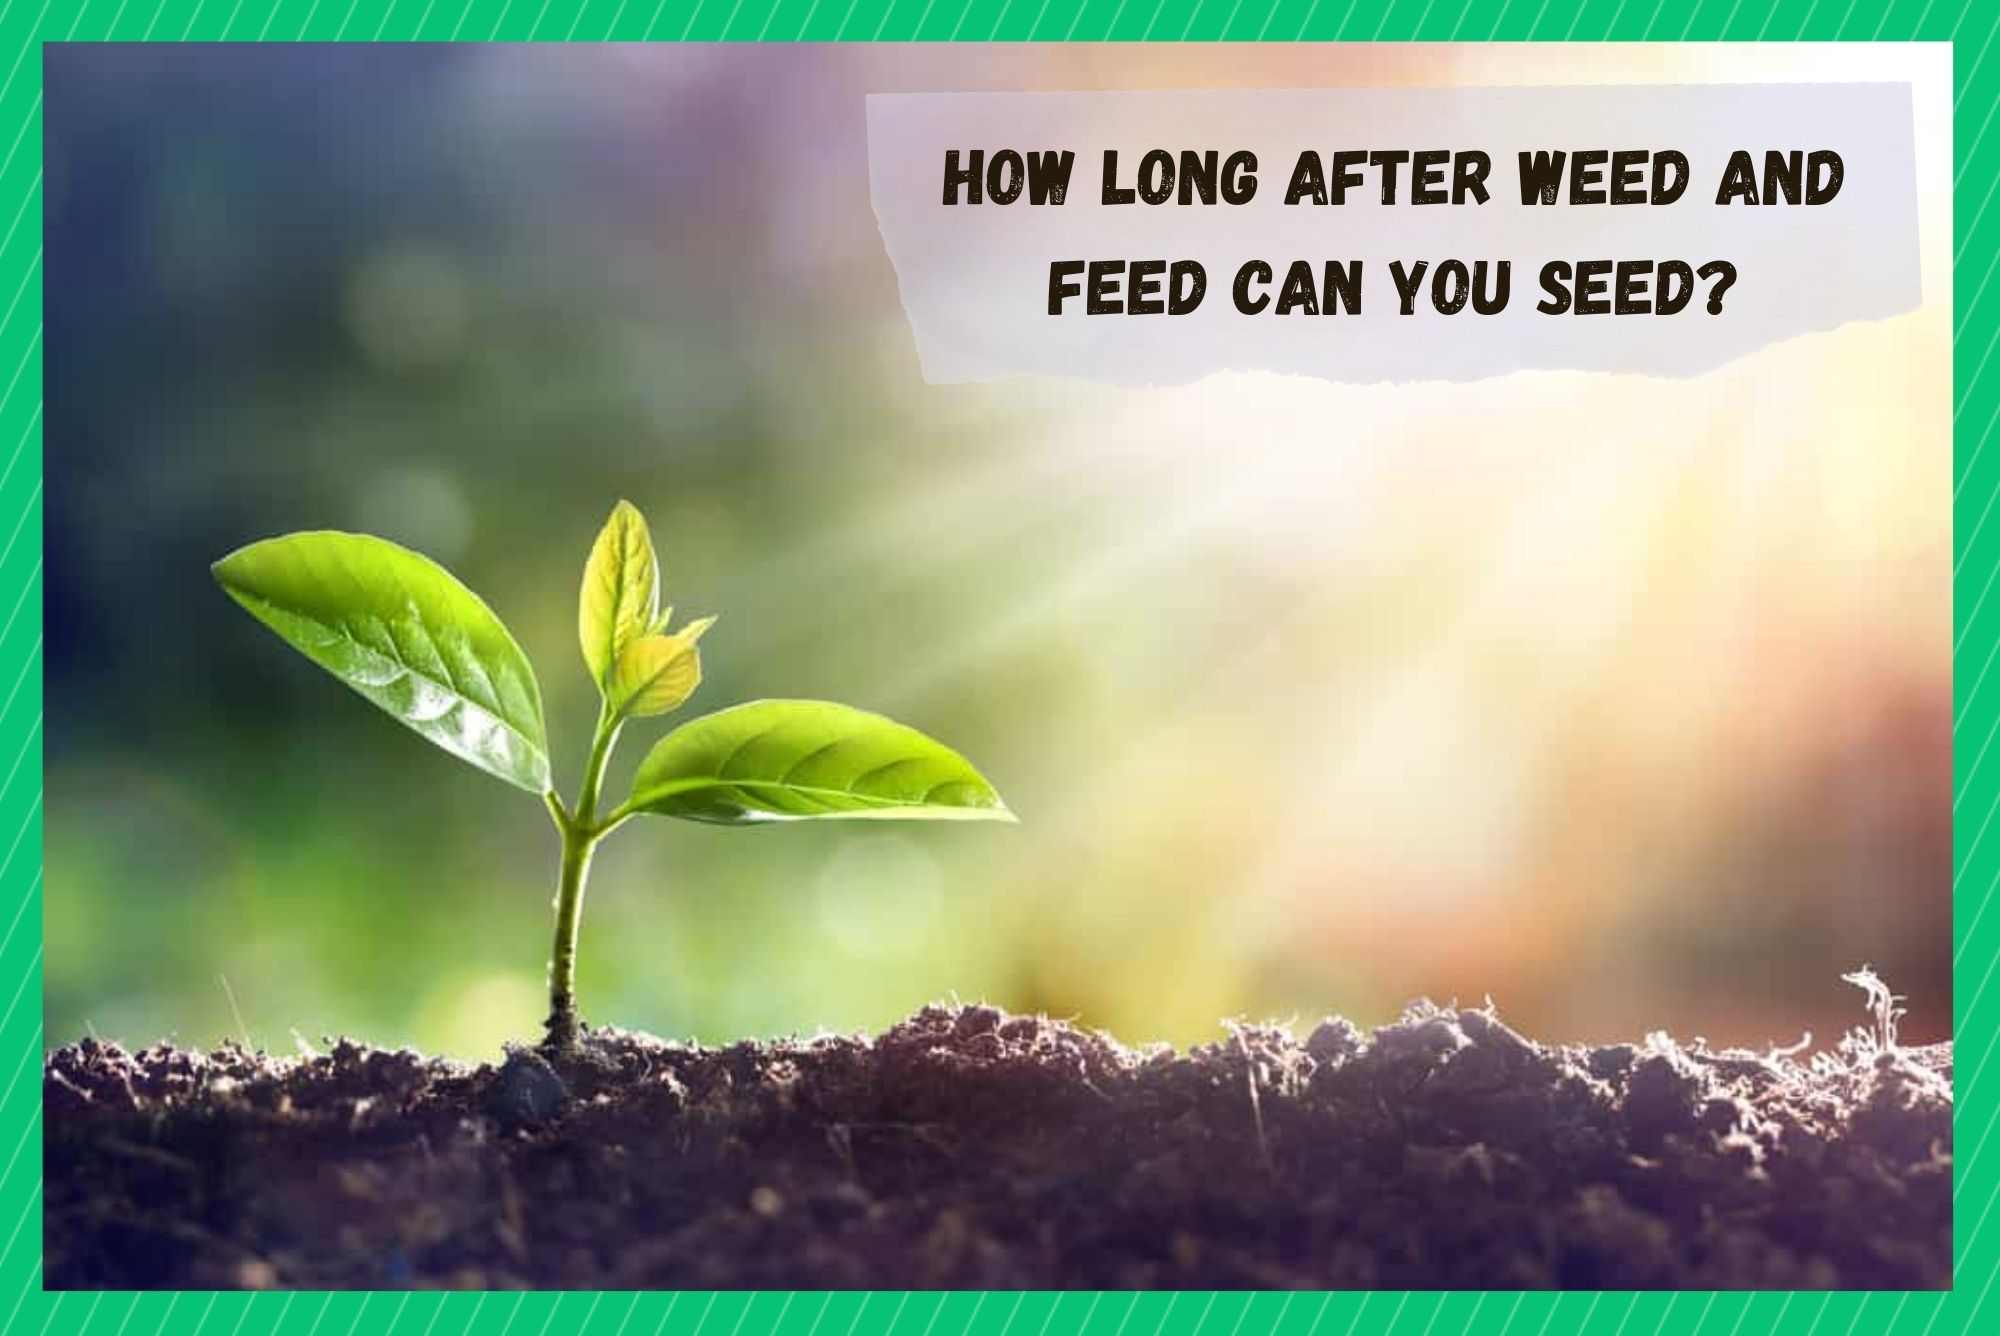 how long after weed and feed can you seed